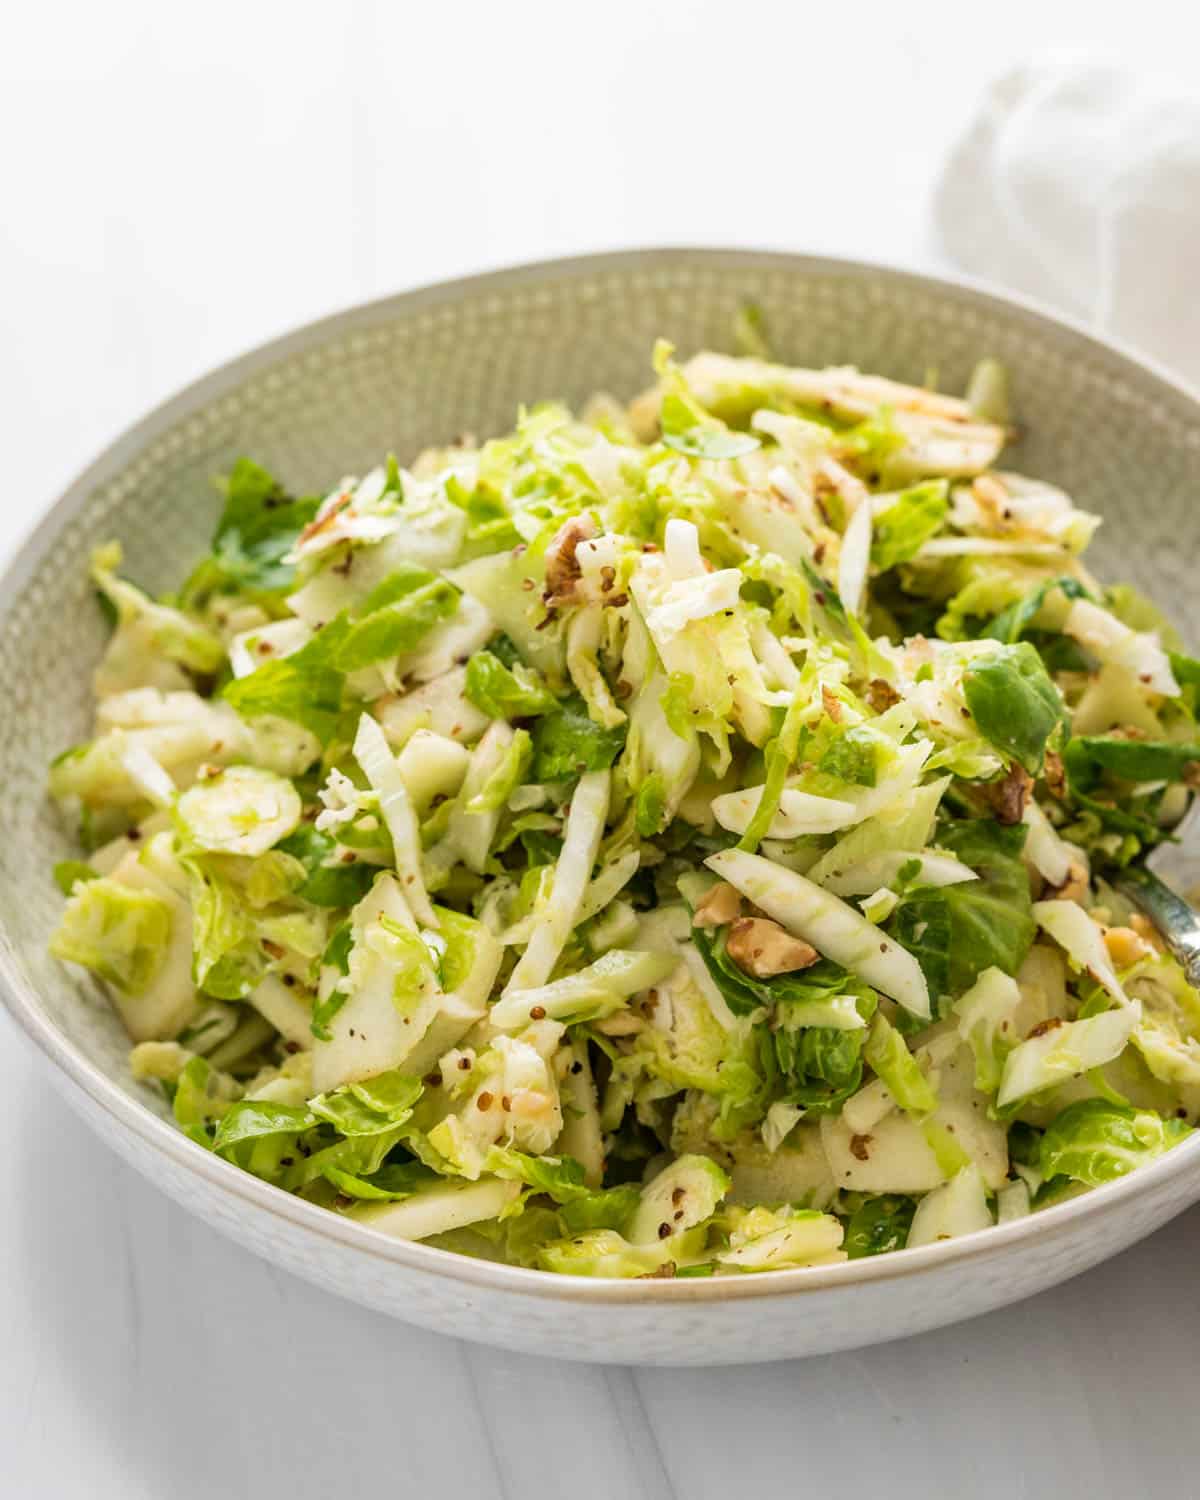 Serving the slaw with walnuts.